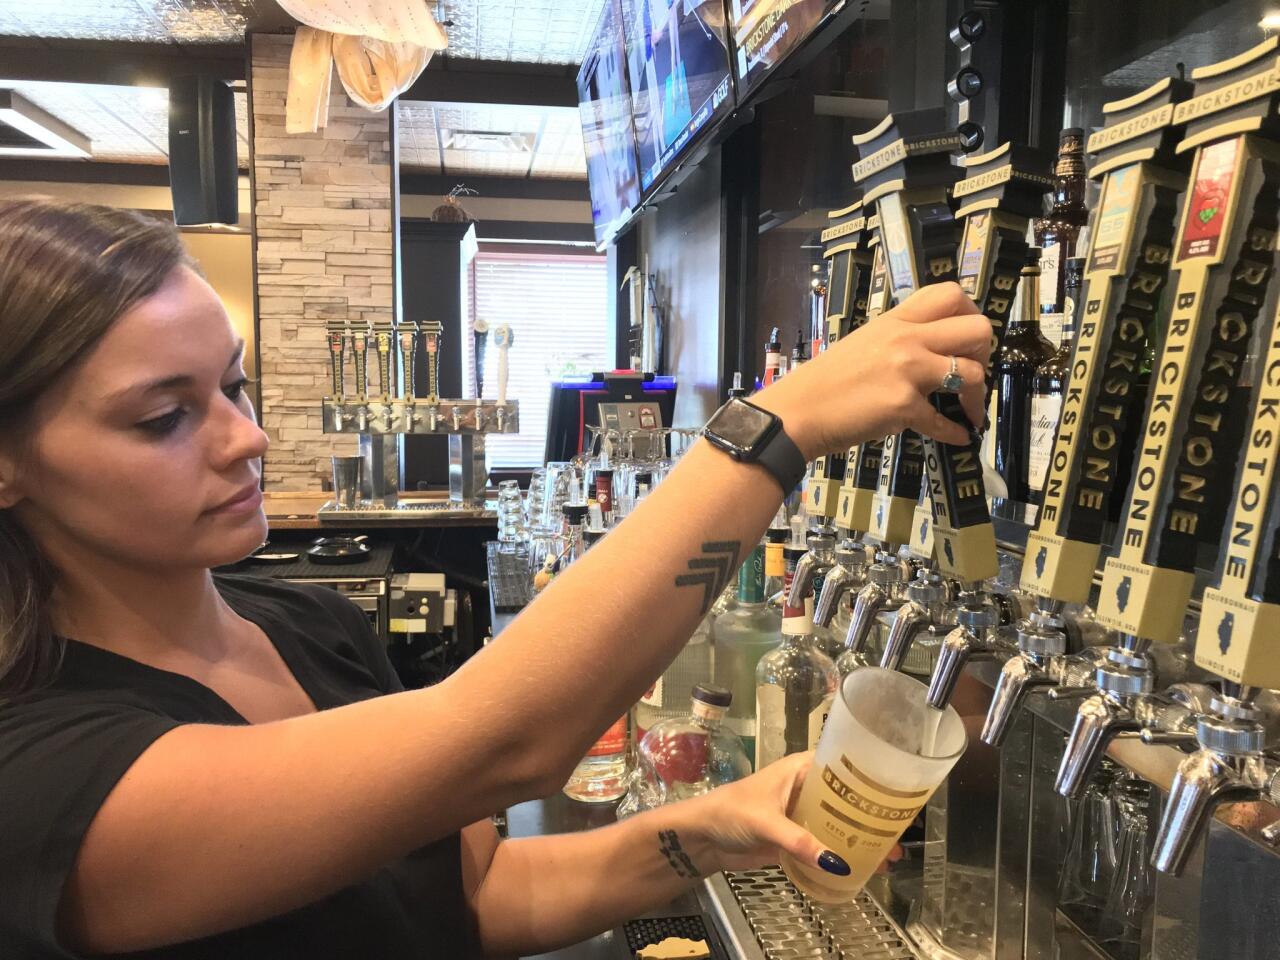 Award-winning brews are on tap at BrickStone Brewery, a popular place to drink and eat in Bourbonnais.